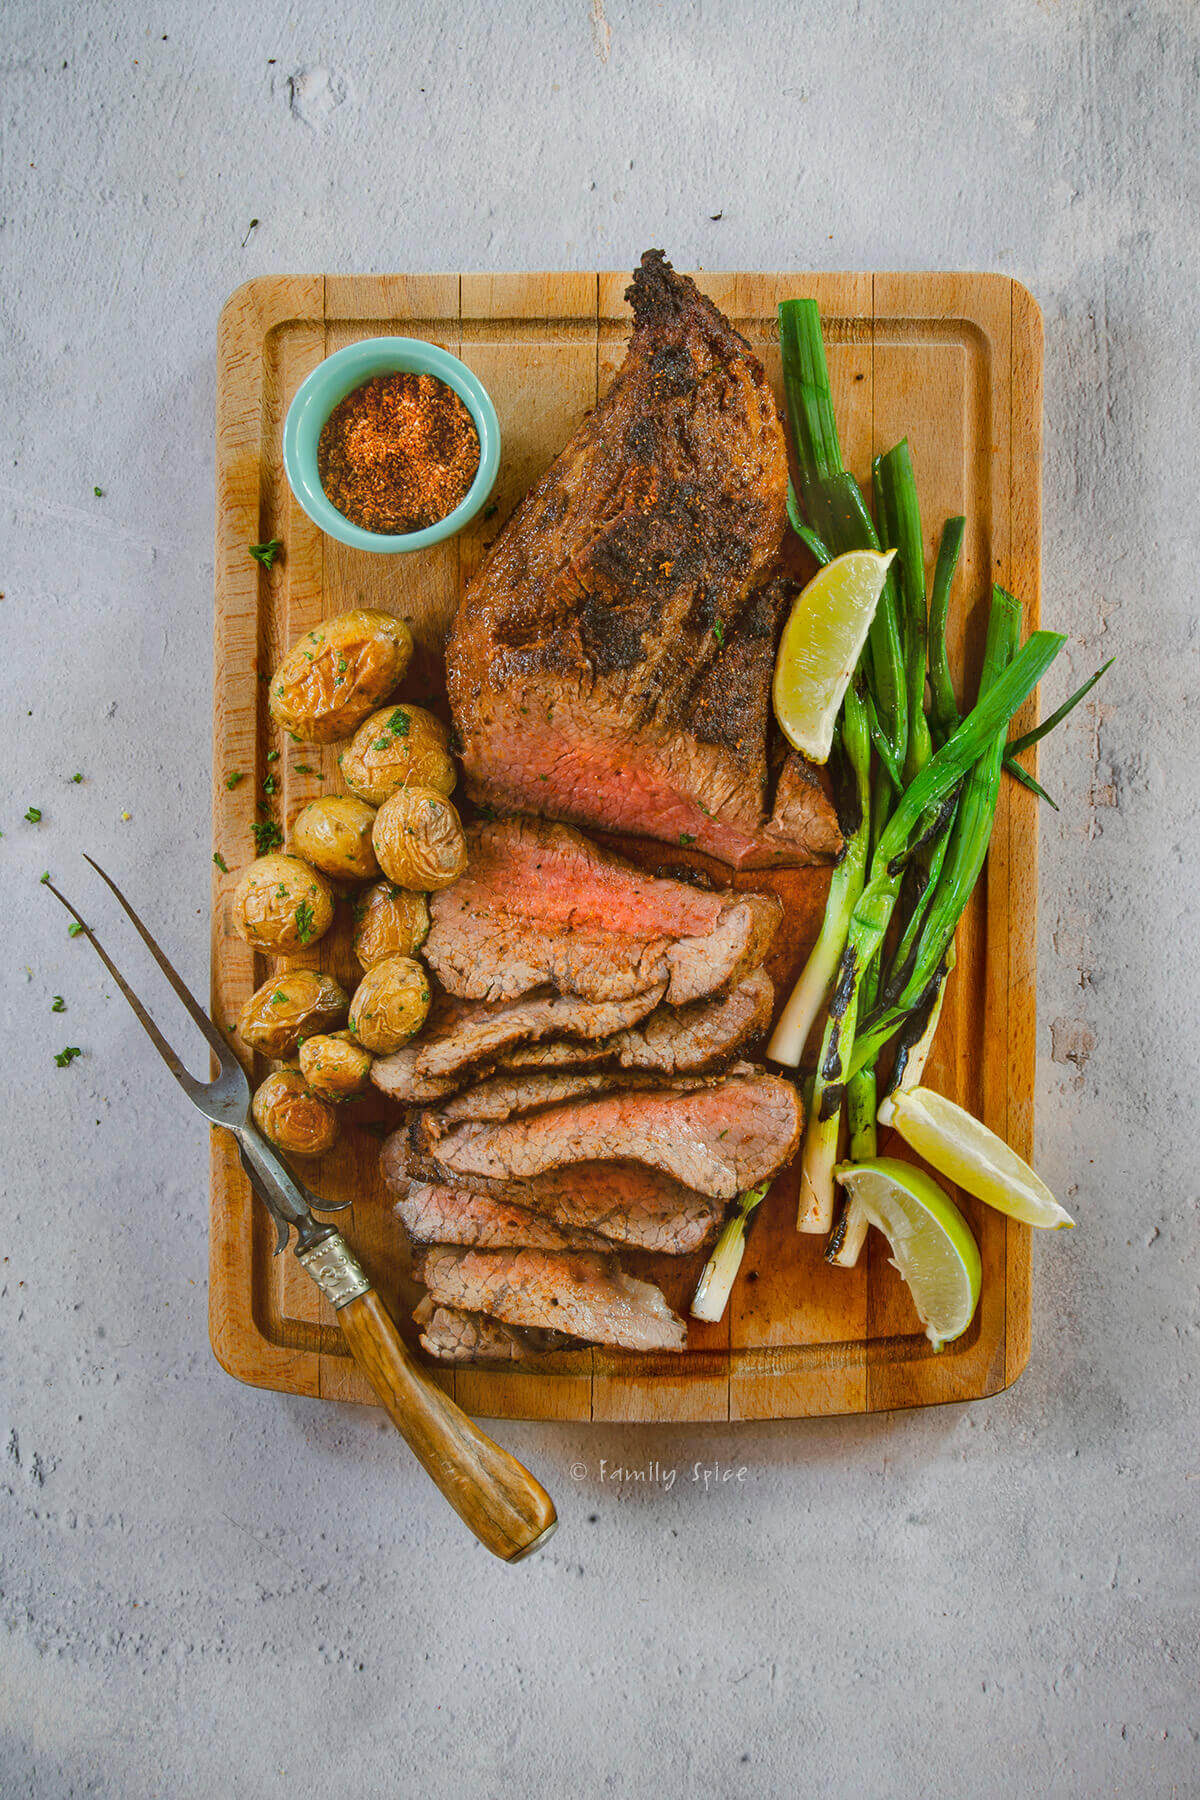 Top view of a roasted tri tip sliced up with potatoes and green onions on a cutting board